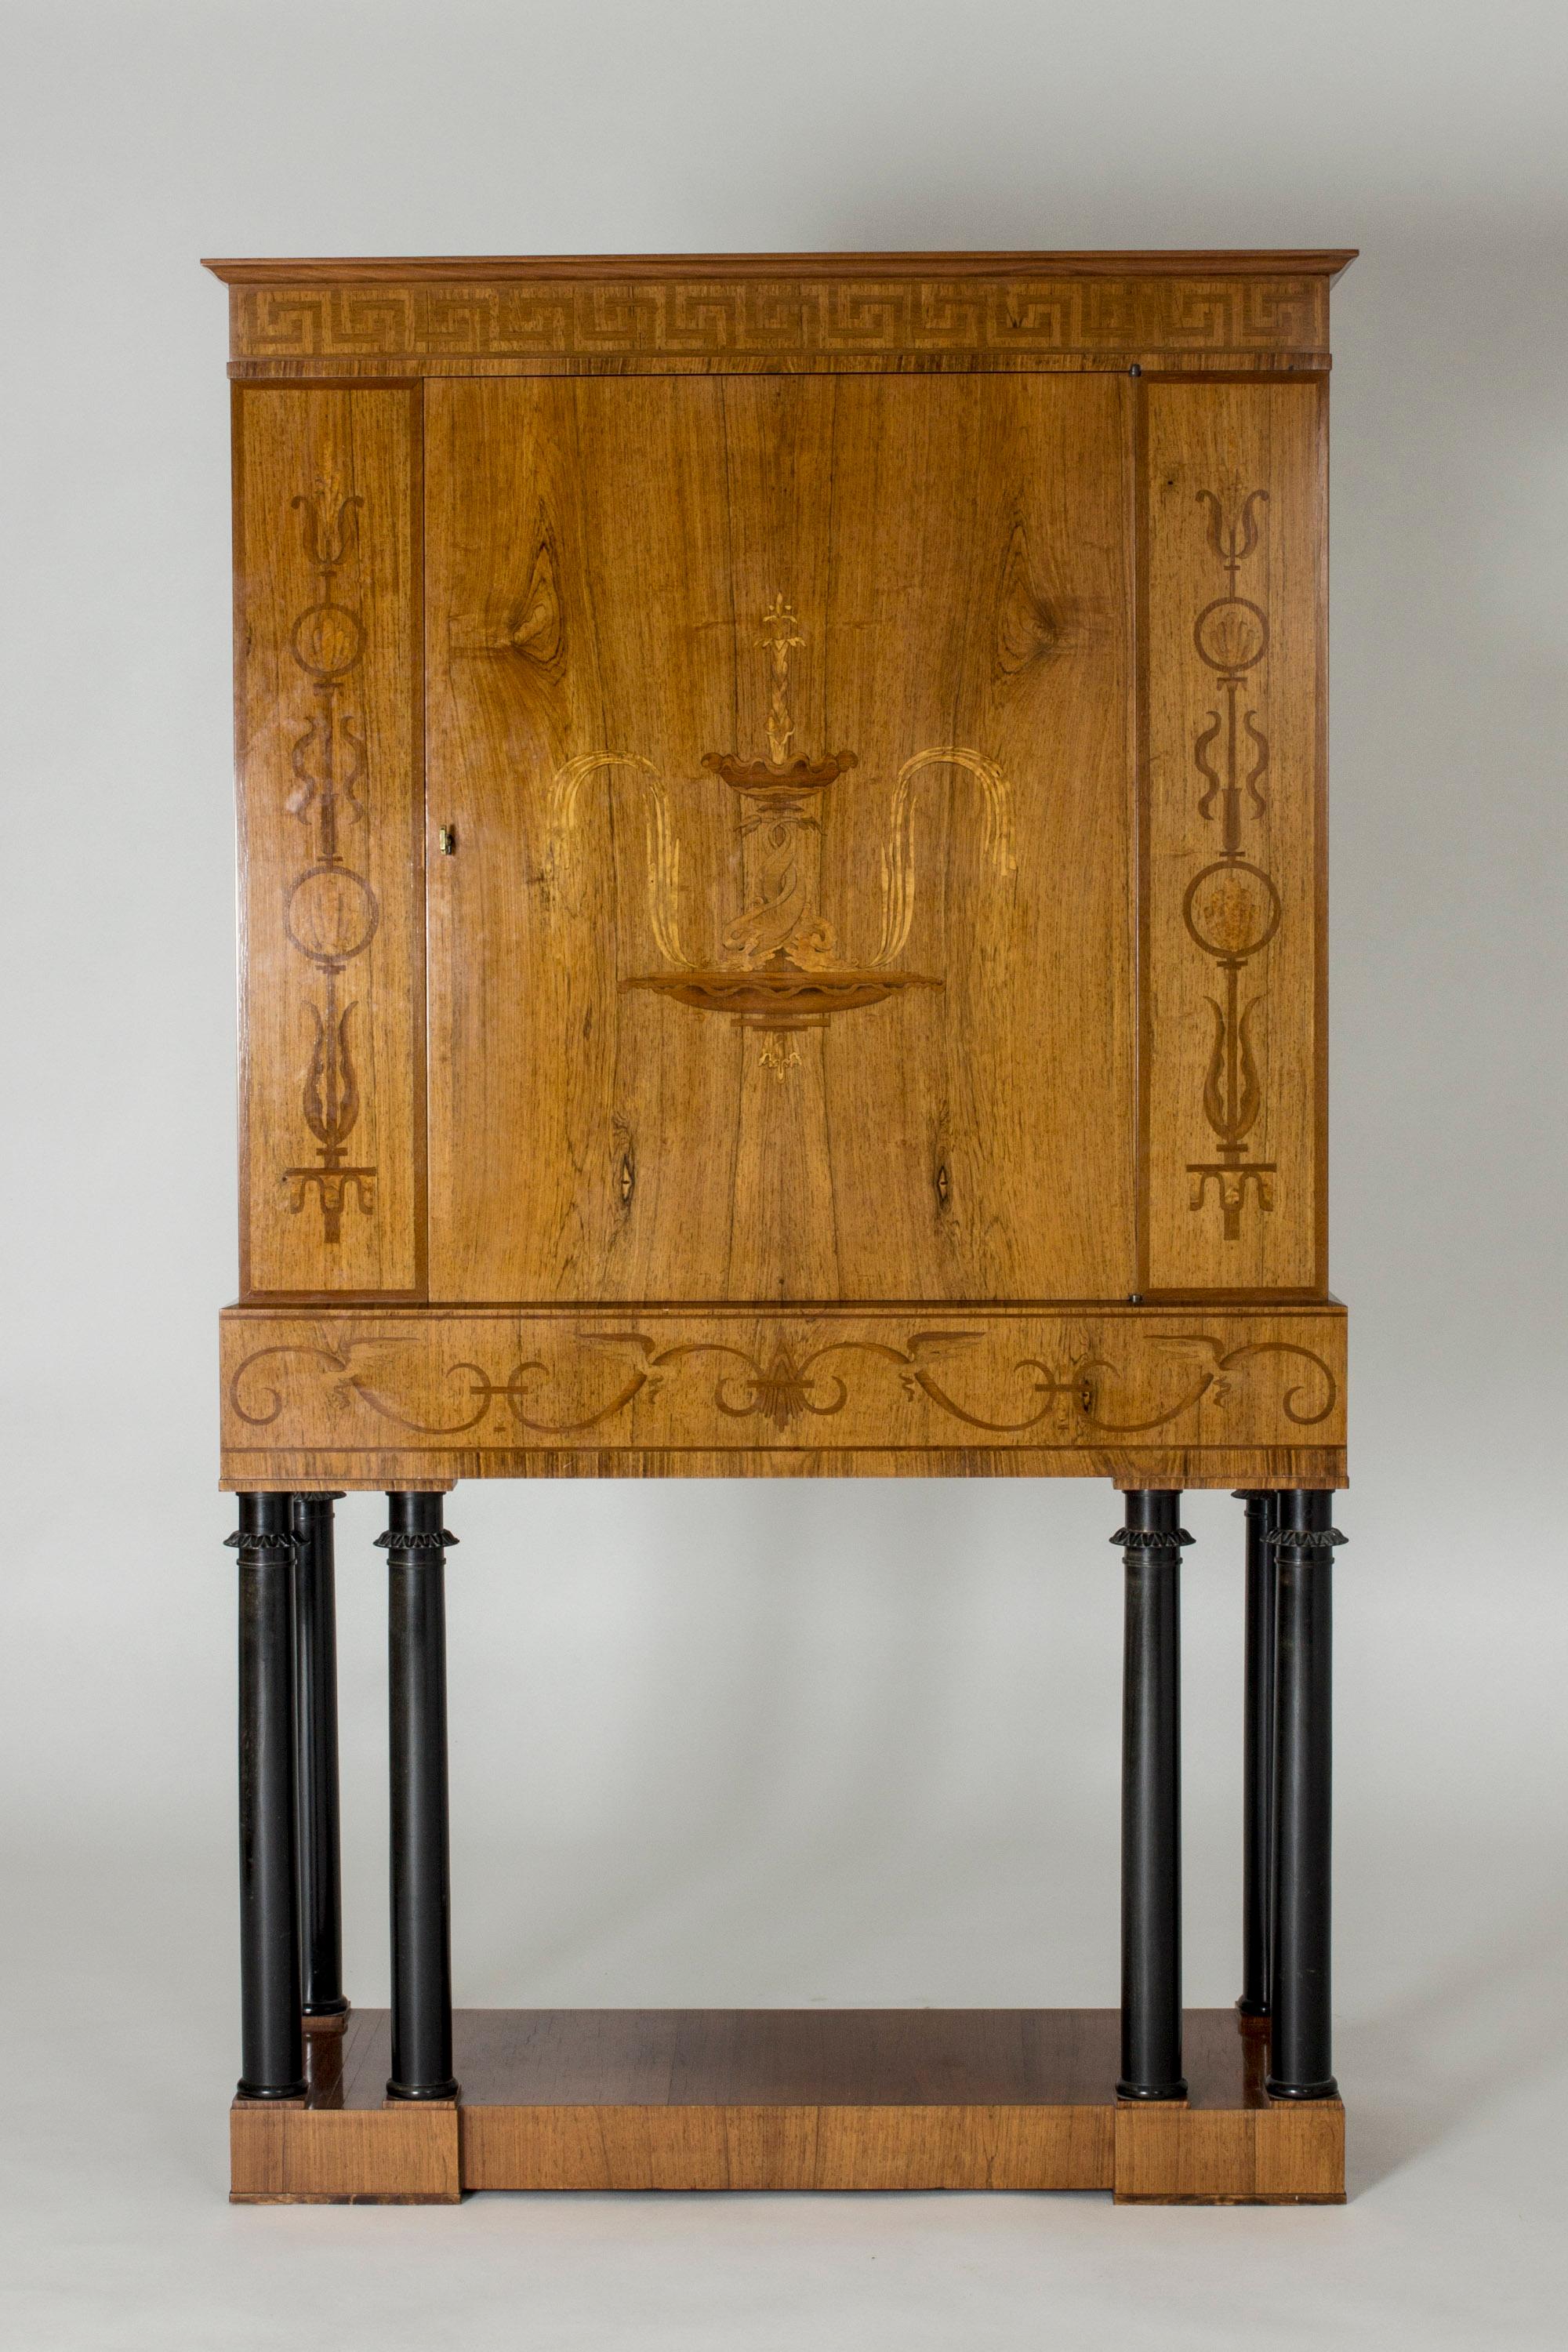 Stunning cabinet by Oscar Nilsson, made in palisander. Master cabinet maker built. Exquisitely decorated front and sides, with a meander border and Classic ornaments. The inlays in the centre of the cabinet shows a fountain, where one can easily